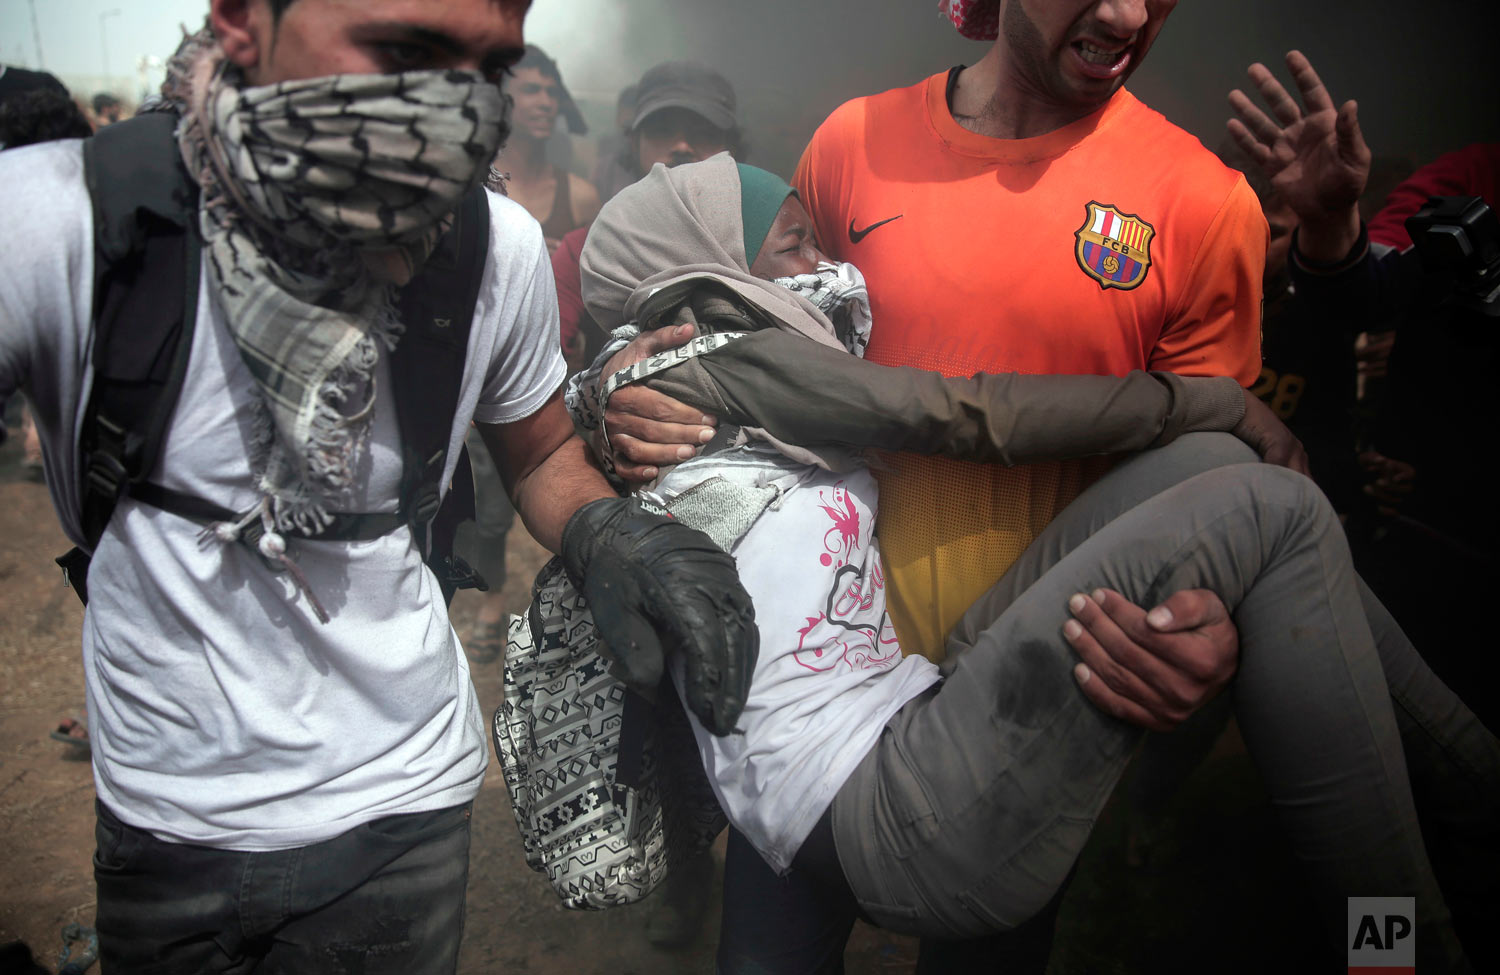  Palestinian protesters evacuate a wounded woman during a protest at the Gaza Strip's border with Israel, Friday, April 20, 2018. Thousands of Palestinians joined the fourth weekly protest on Gaza's border with Israel on Fridays. Hamas says the prote